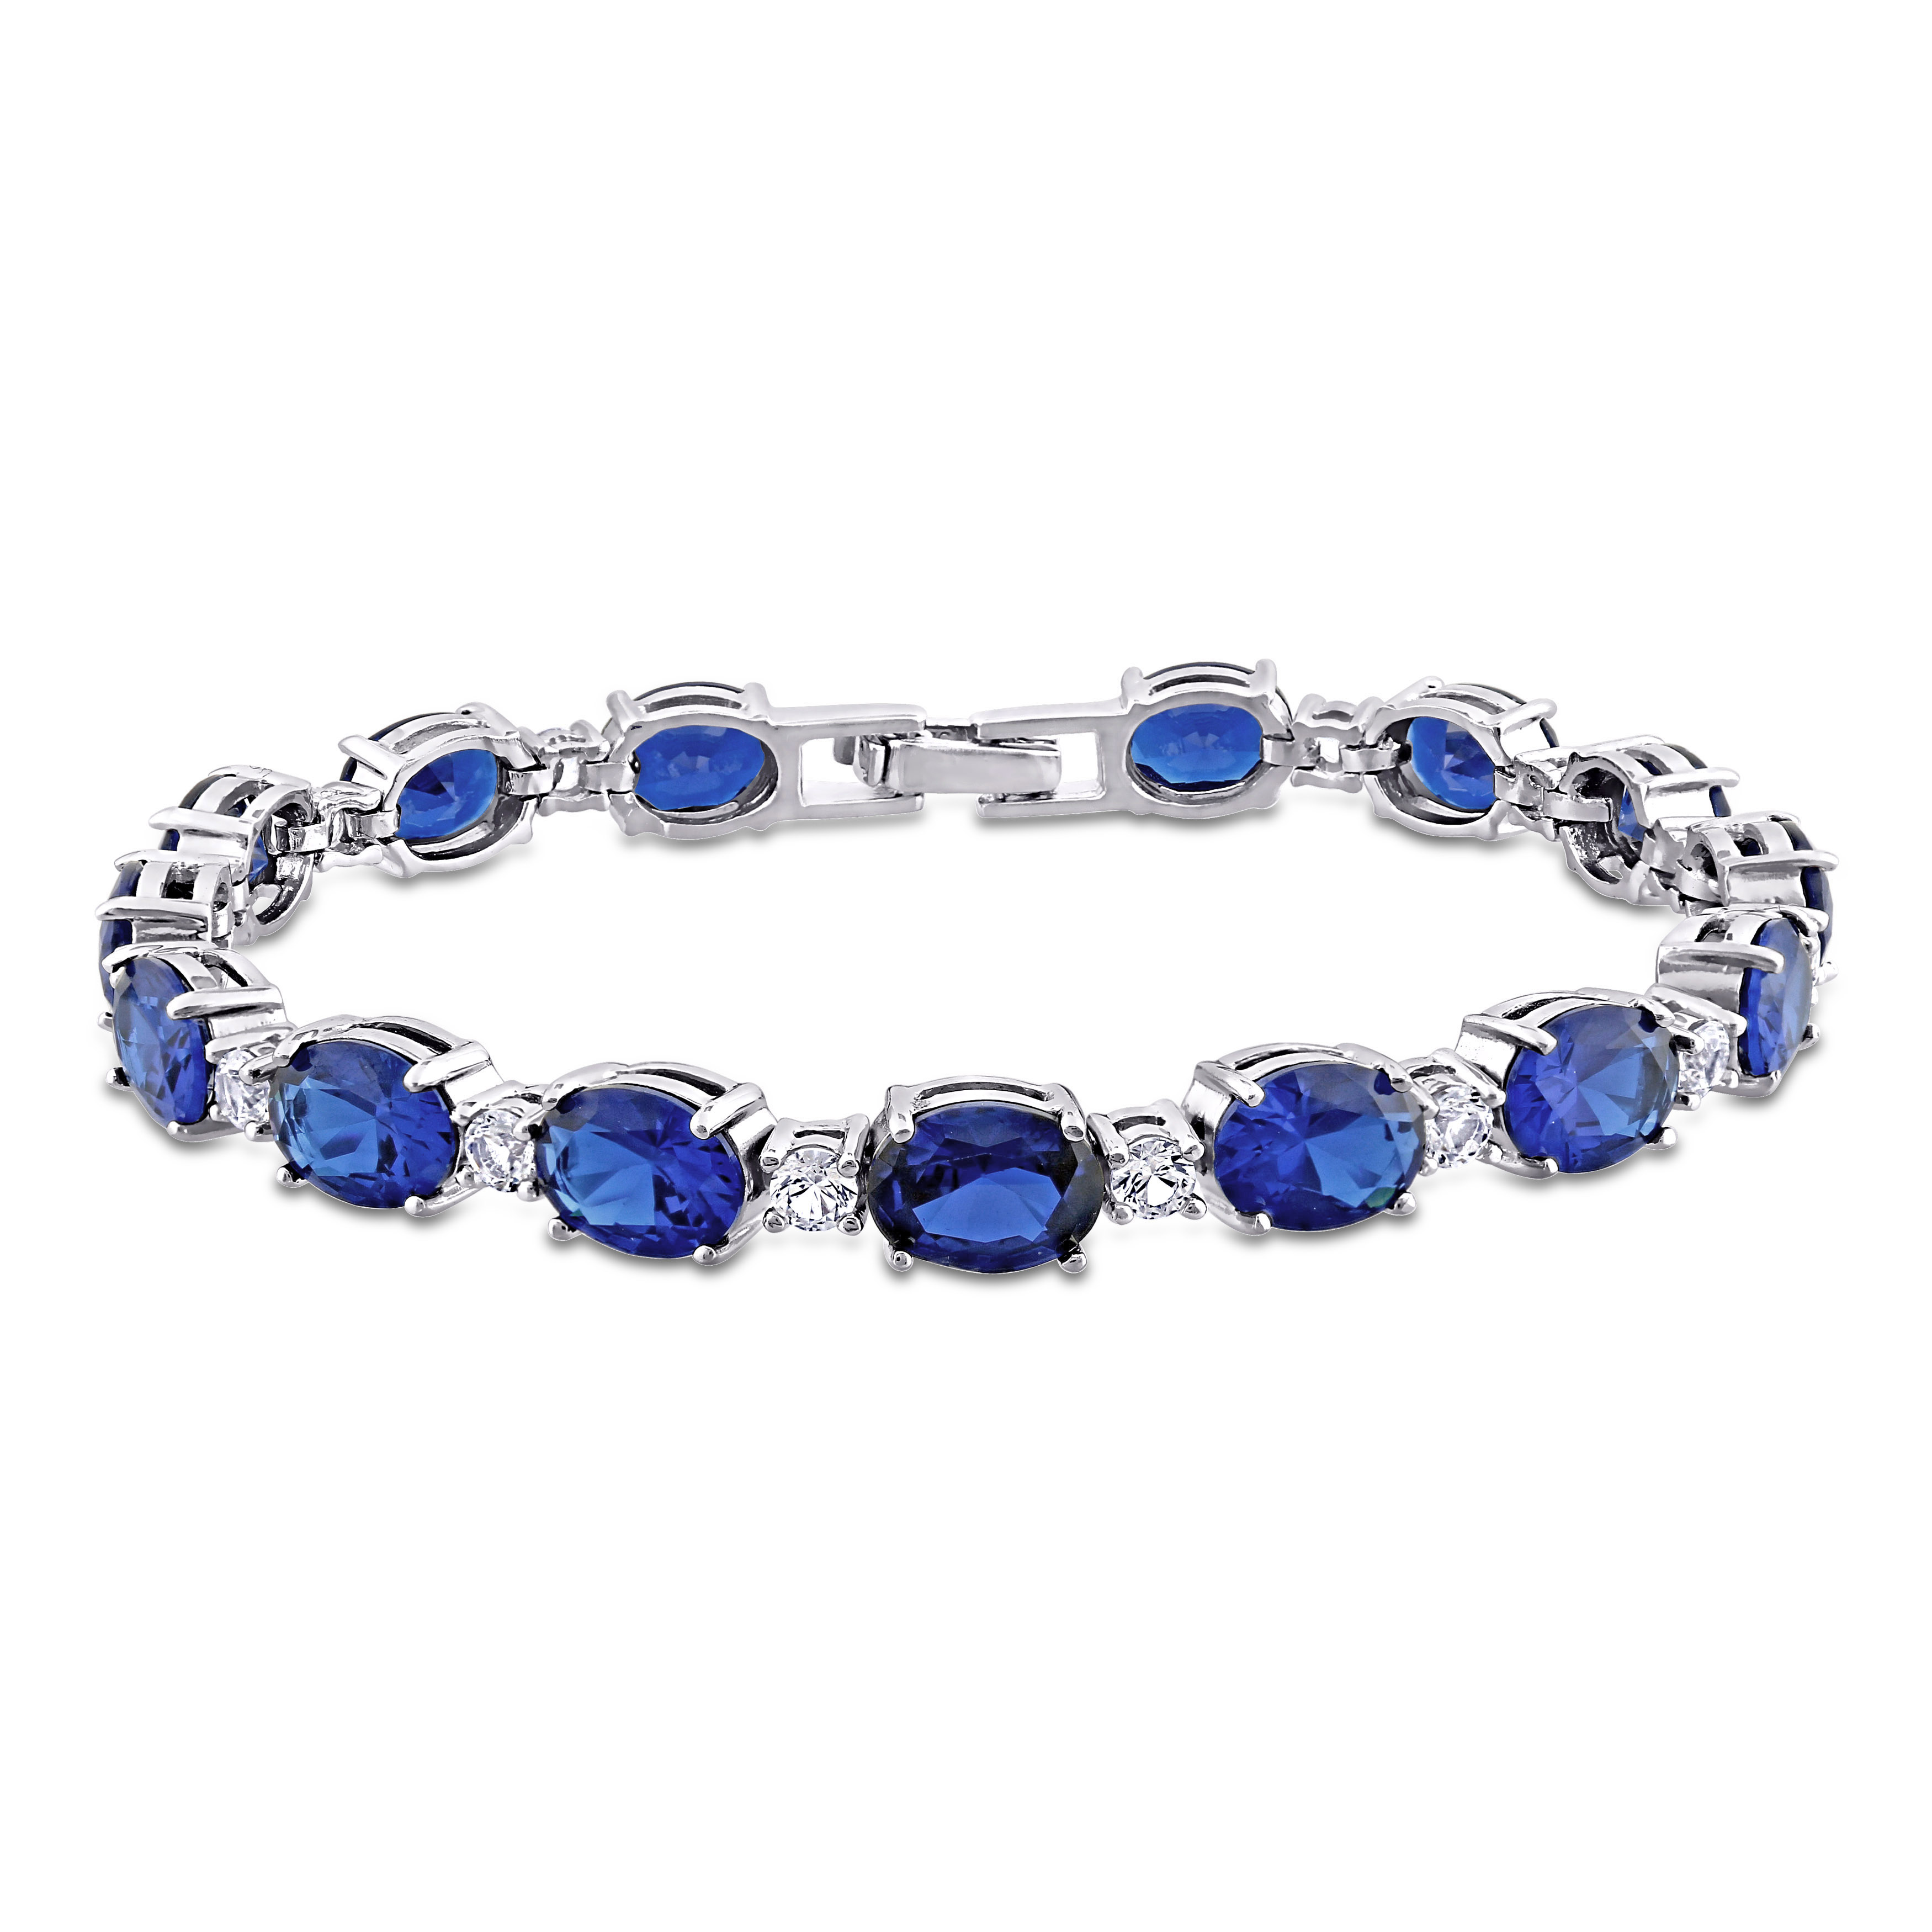 32 CT TGW Oval Created Blue and White Sapphire Bracelet in Sterling Silver